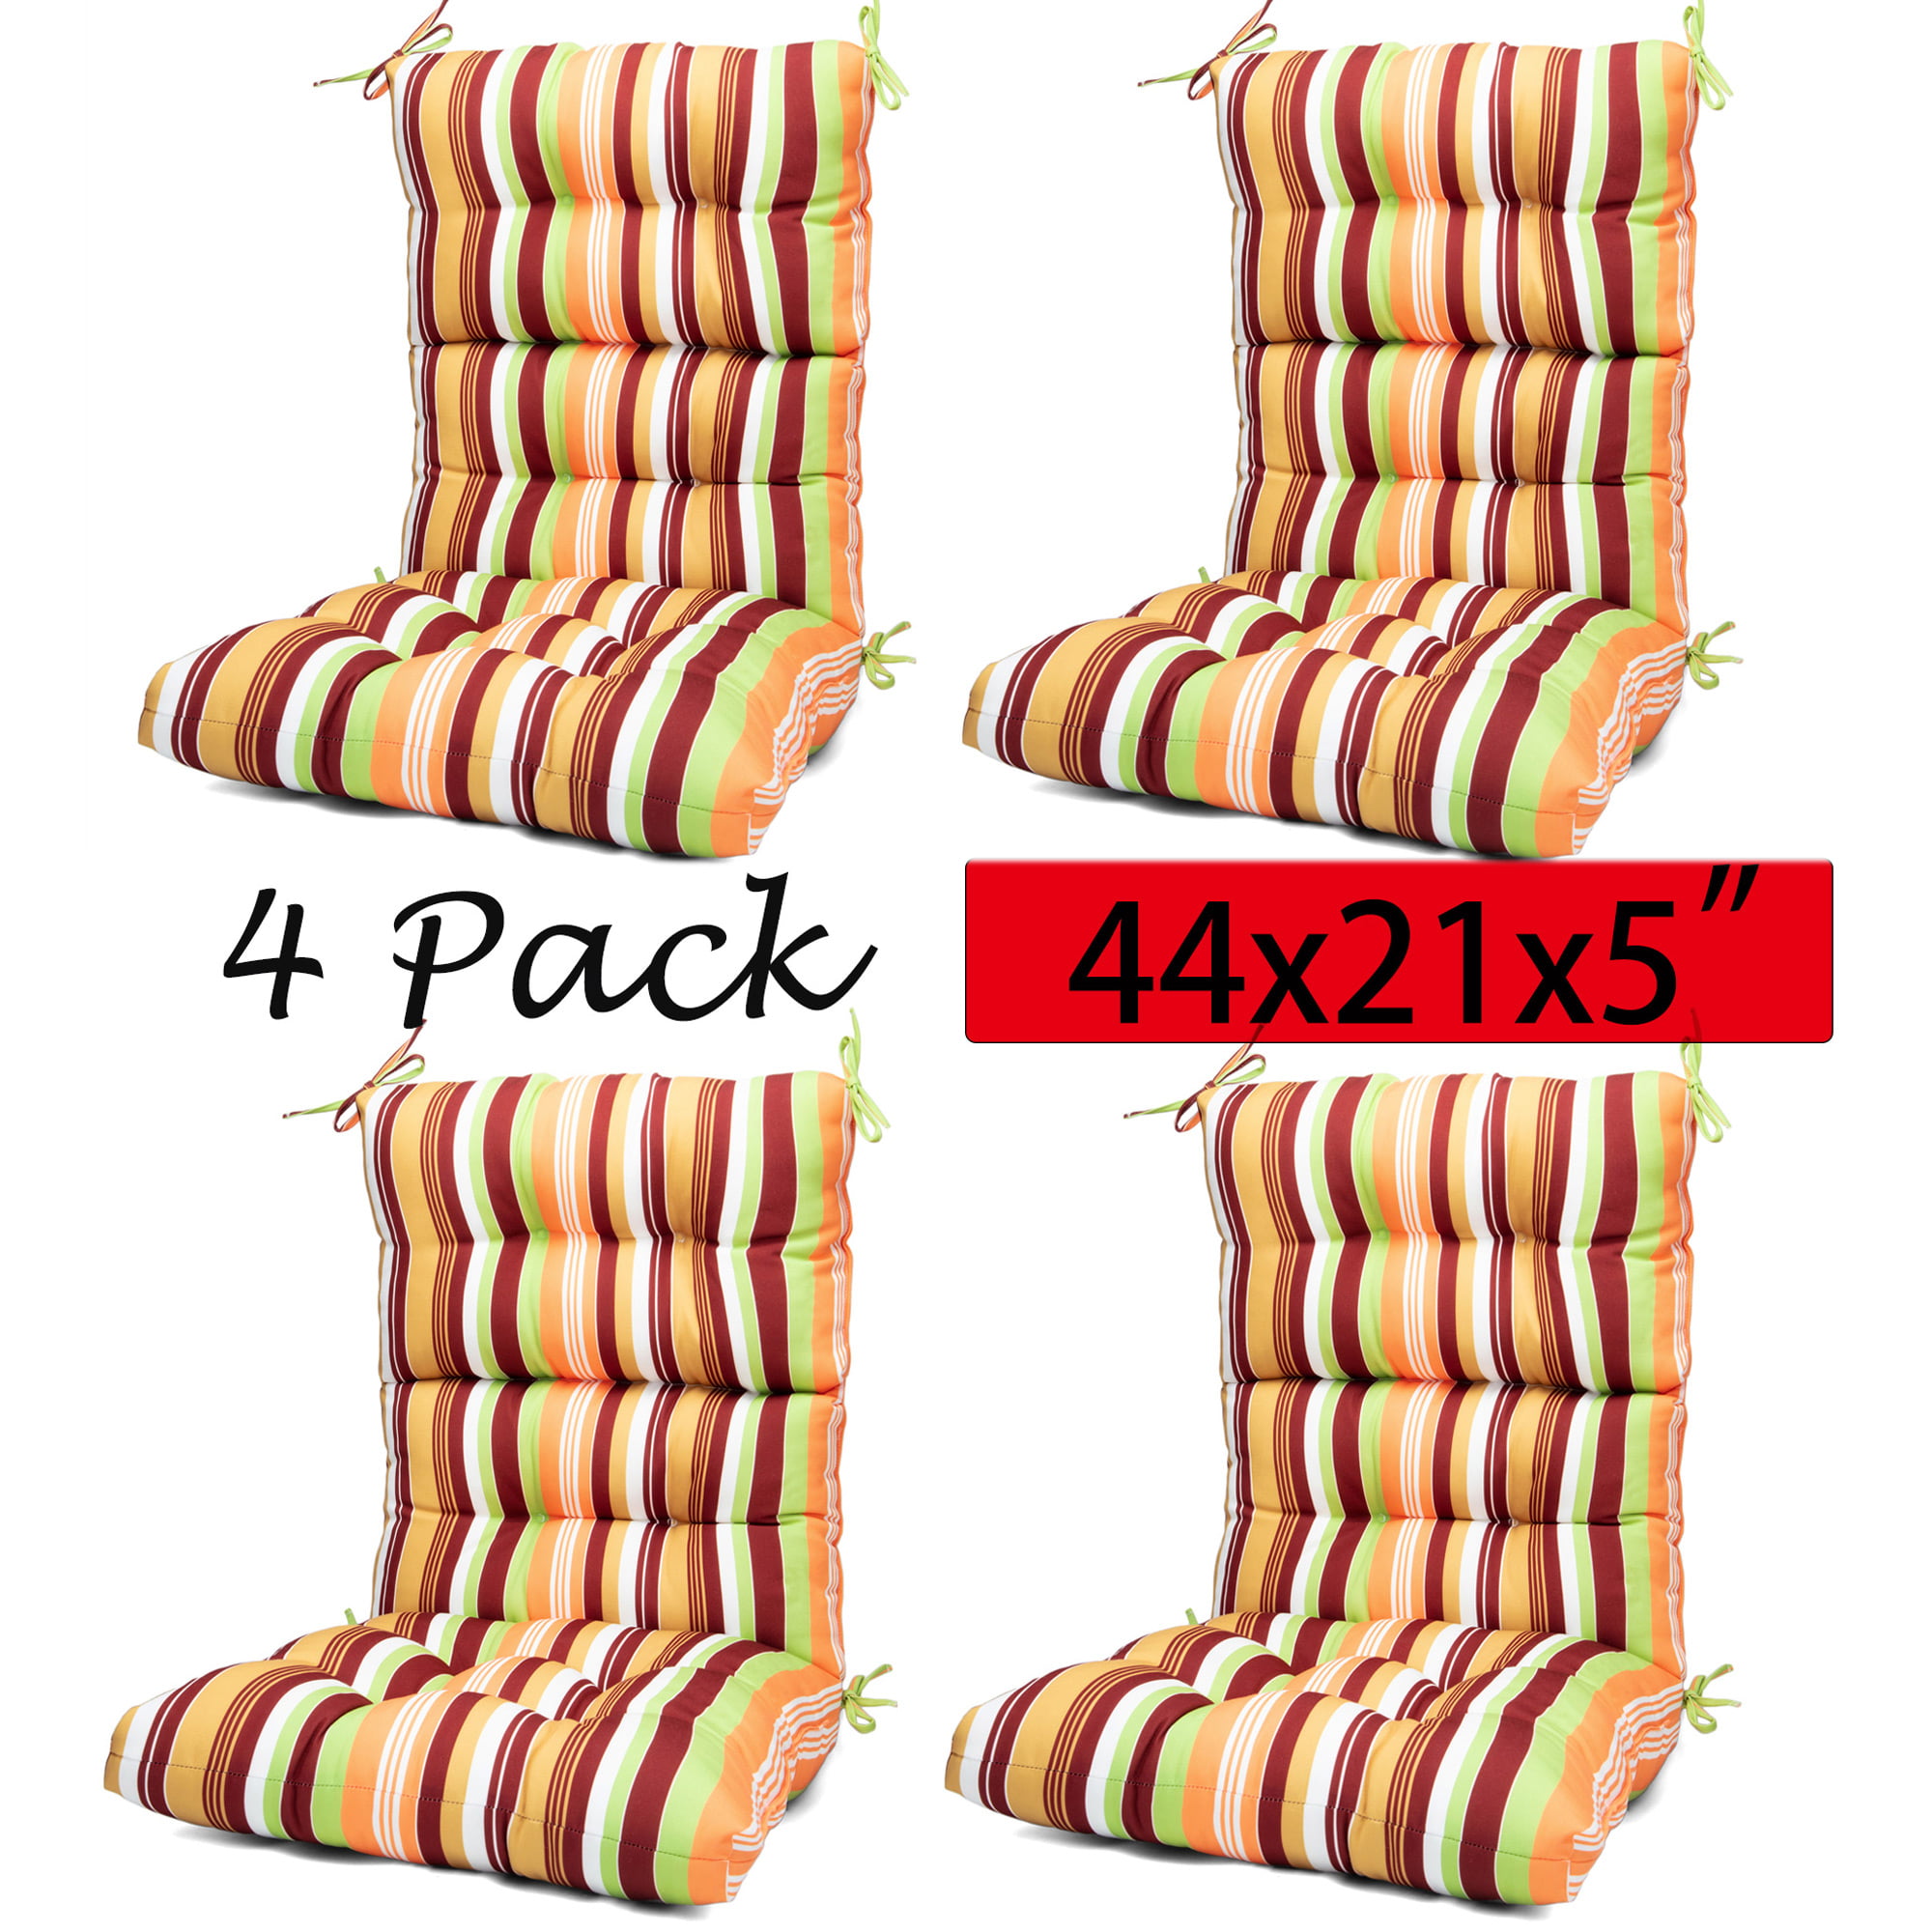 44x21x5 Inch Multifunction Home Outdoor/Indoor High Back Chair Cushion